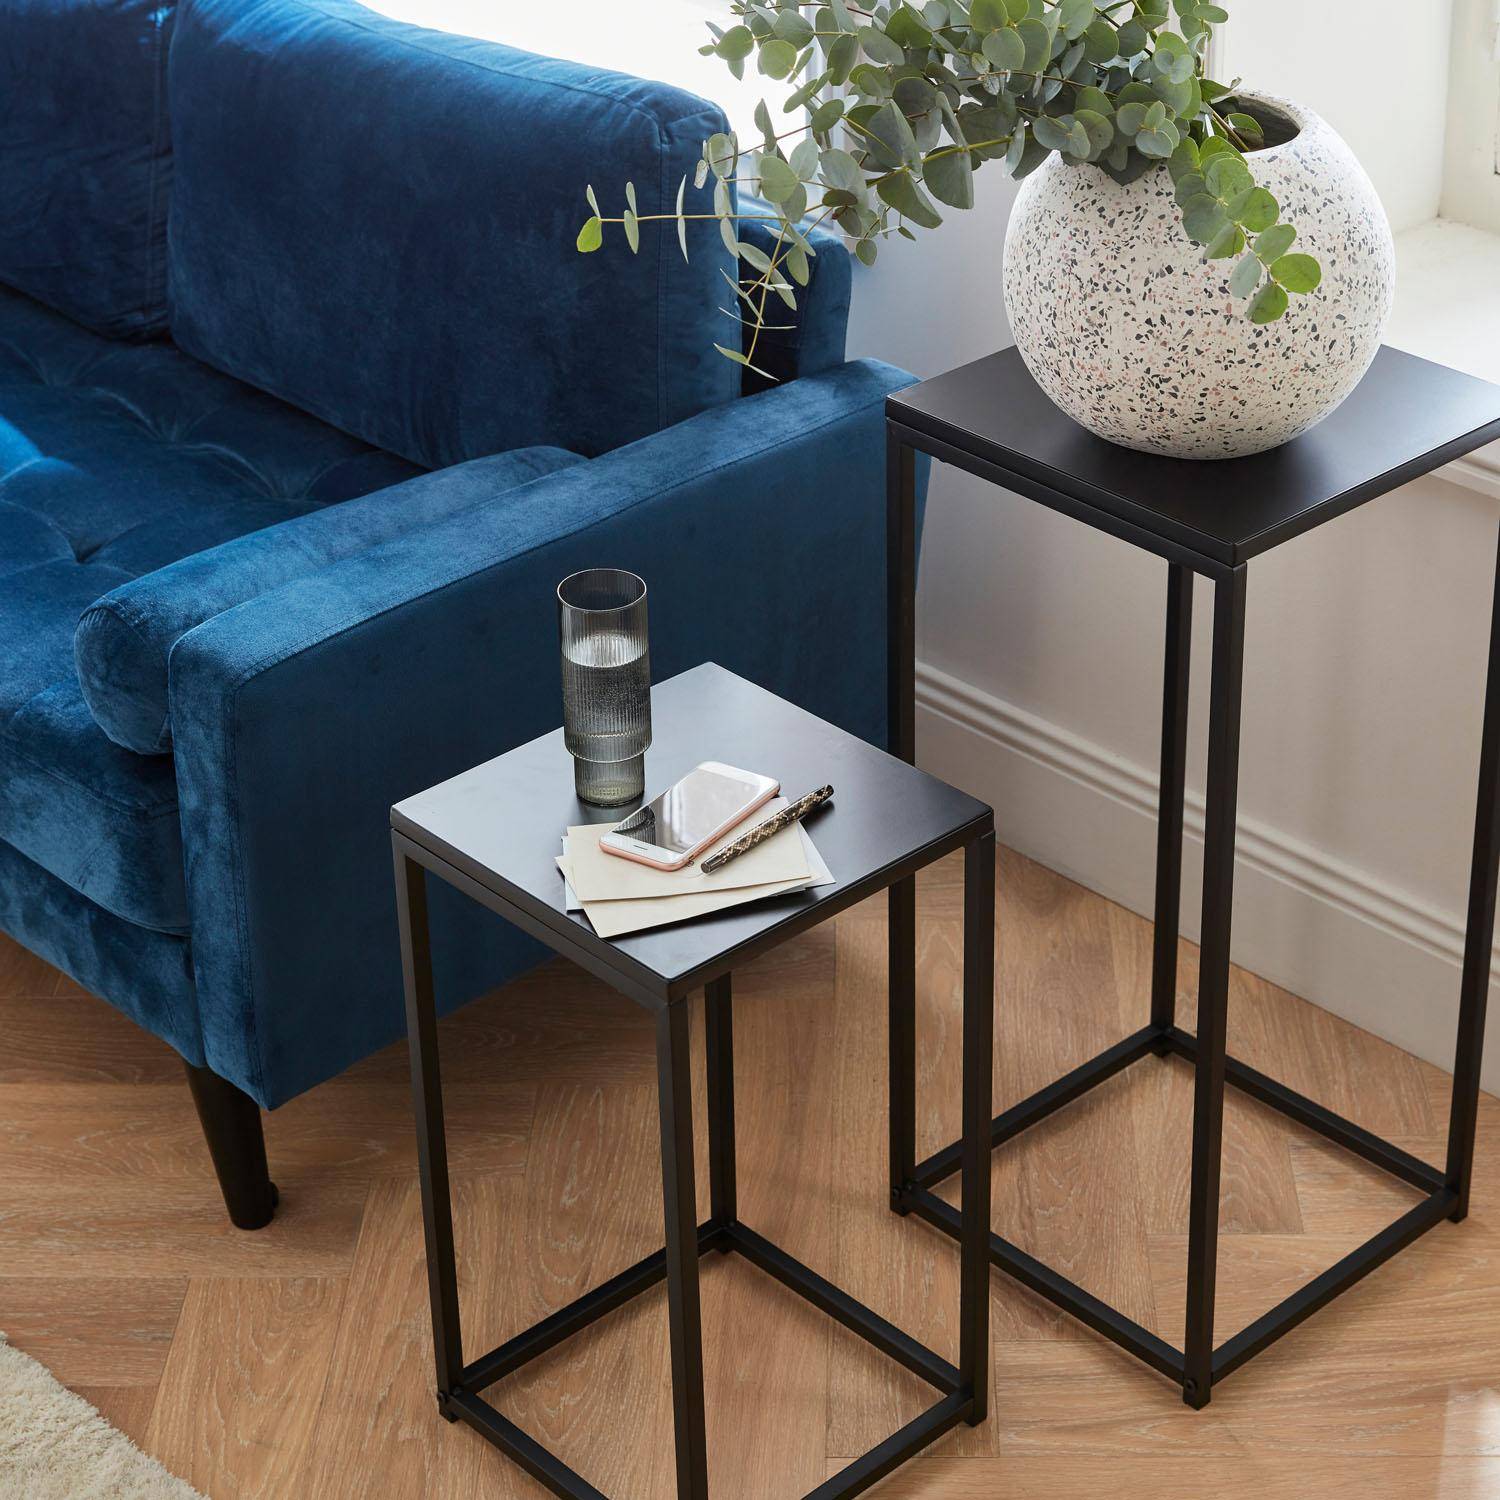 Set of 2 side tables/ end of sofa , Industrielle, Black Photo2